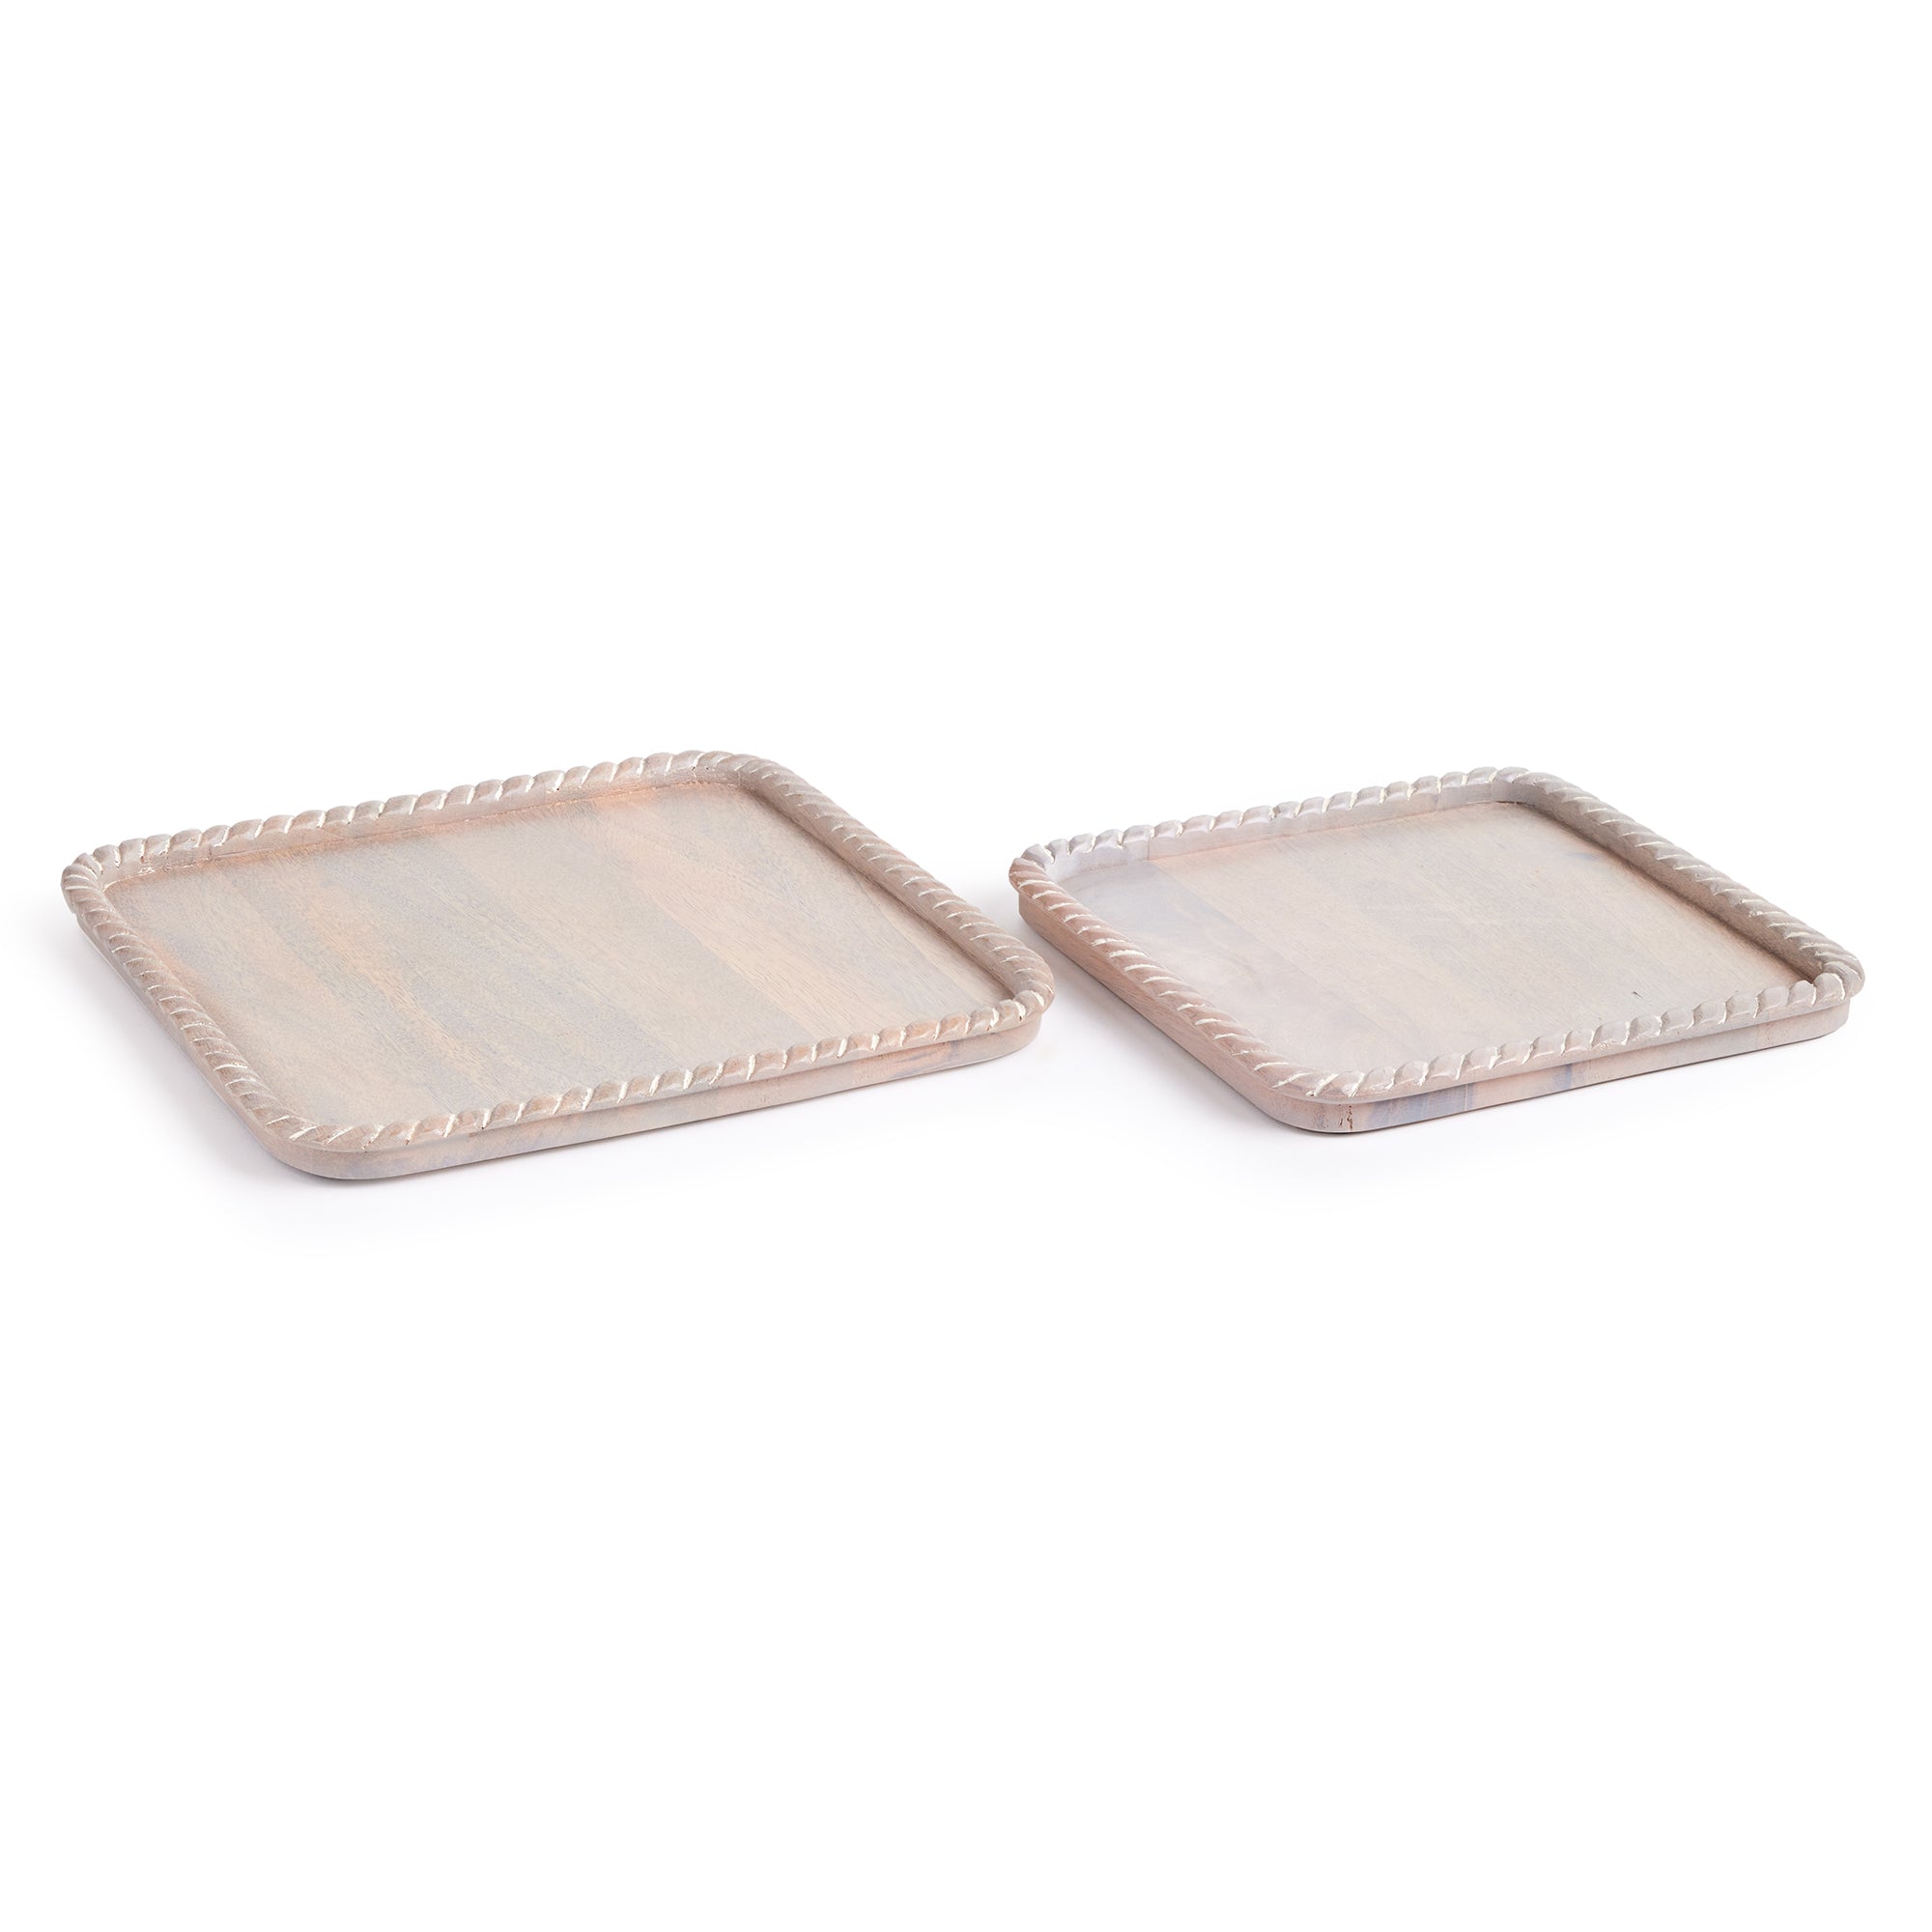 Hand carved from mango wood, this pair of trays is a sweet little accent for baked goods or a cheese tray. A little touch of natural wood tone is always on trend. Amethyst Home provides interior design, new construction, custom furniture, and area rugs in the Houston metro area.